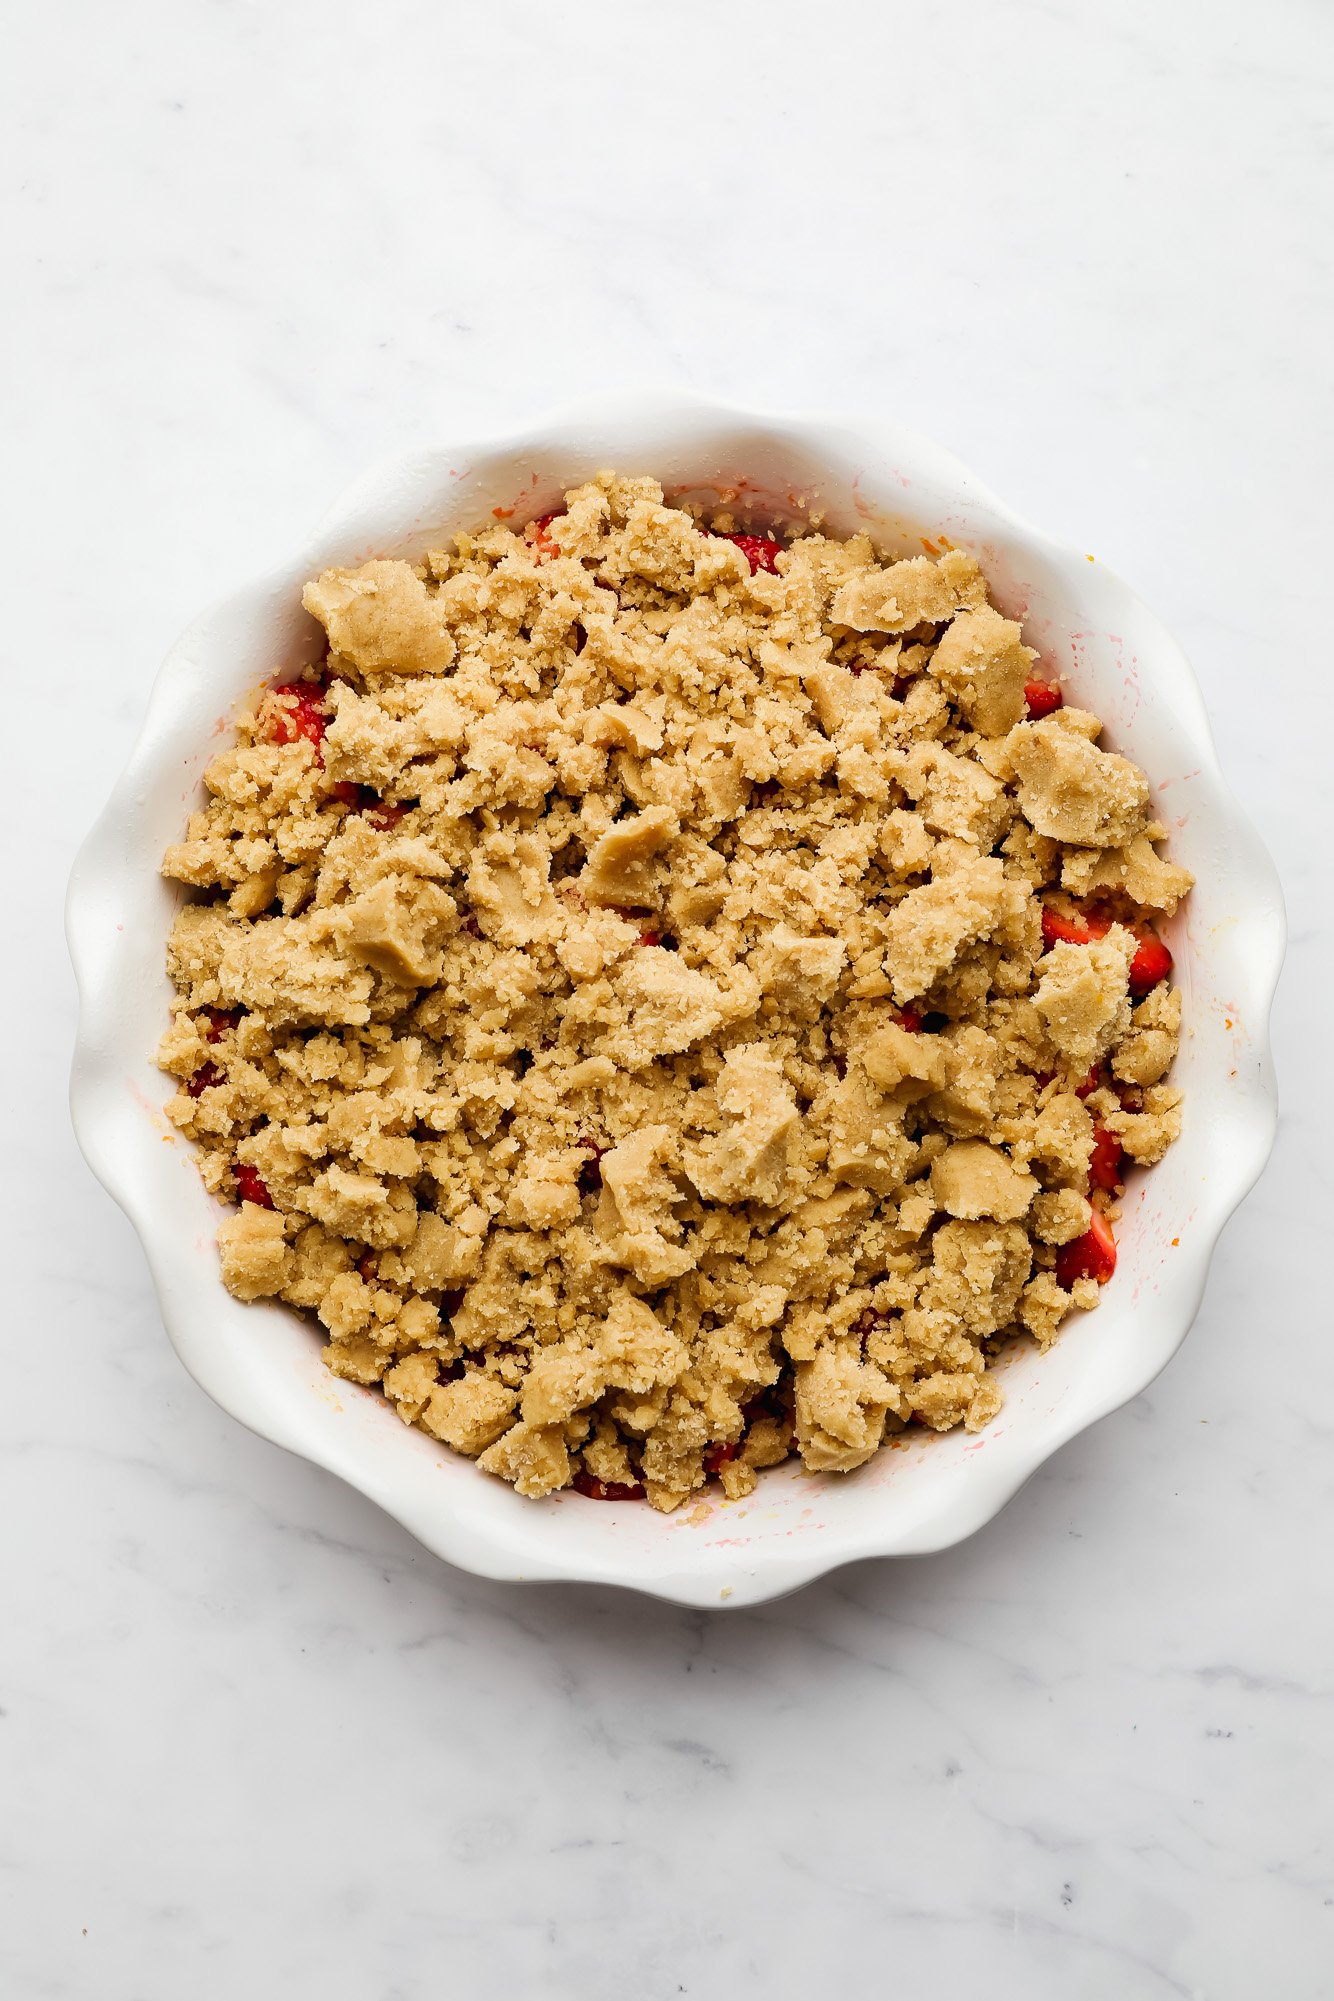 chopped strawberries with a brown crumble topping on top.